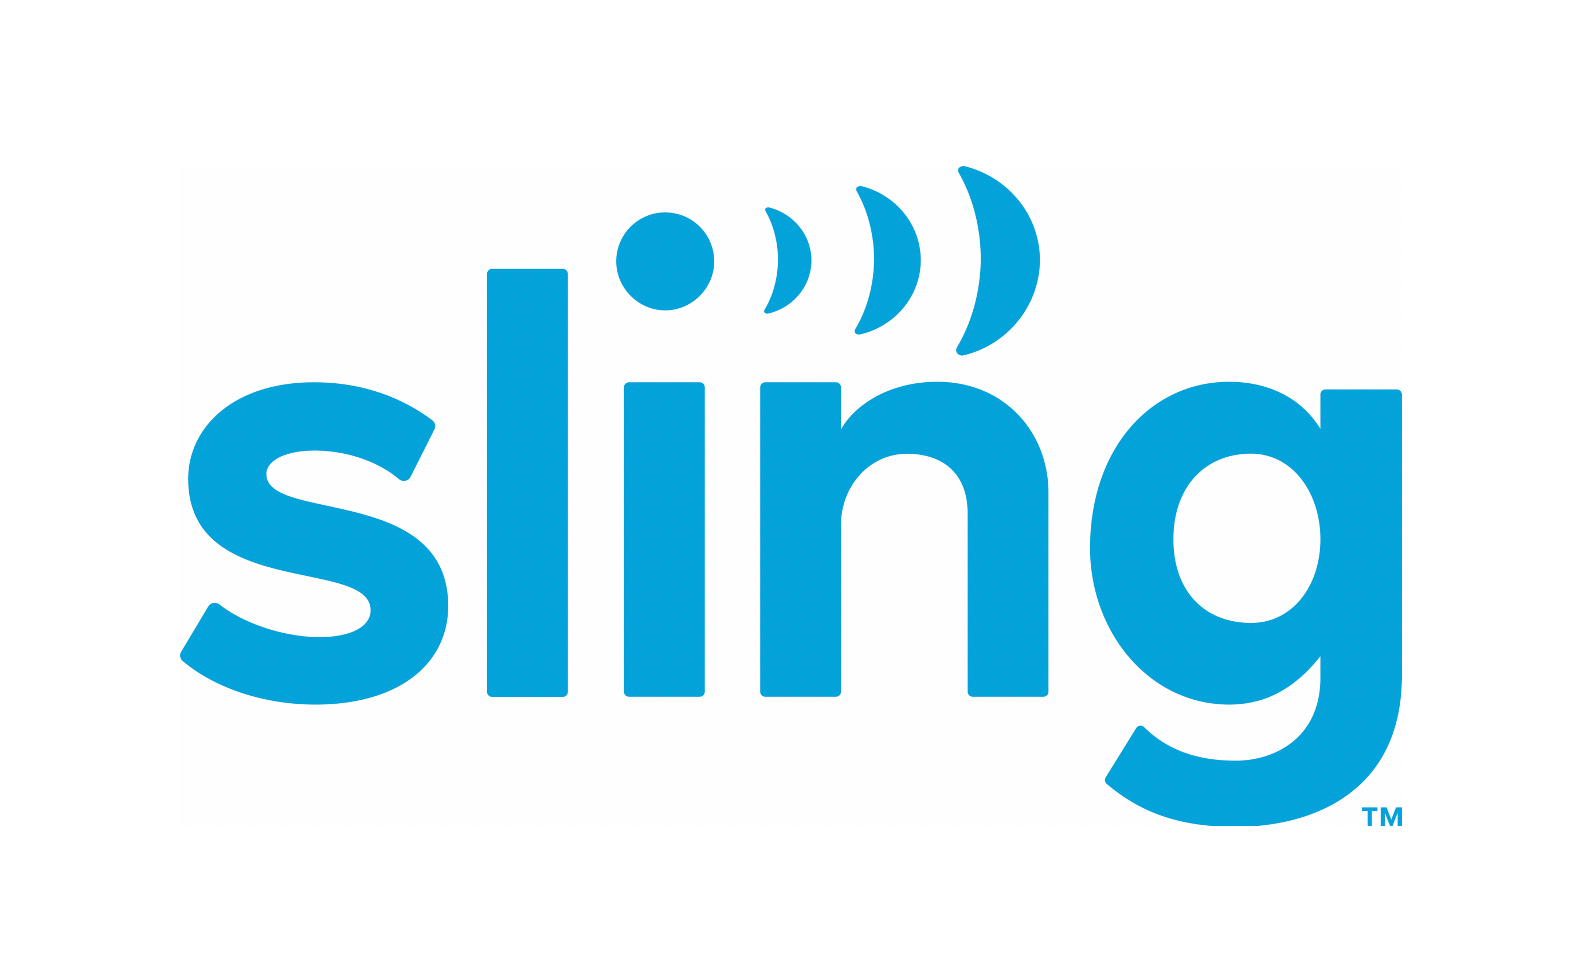 can you watch the superbowl on sling